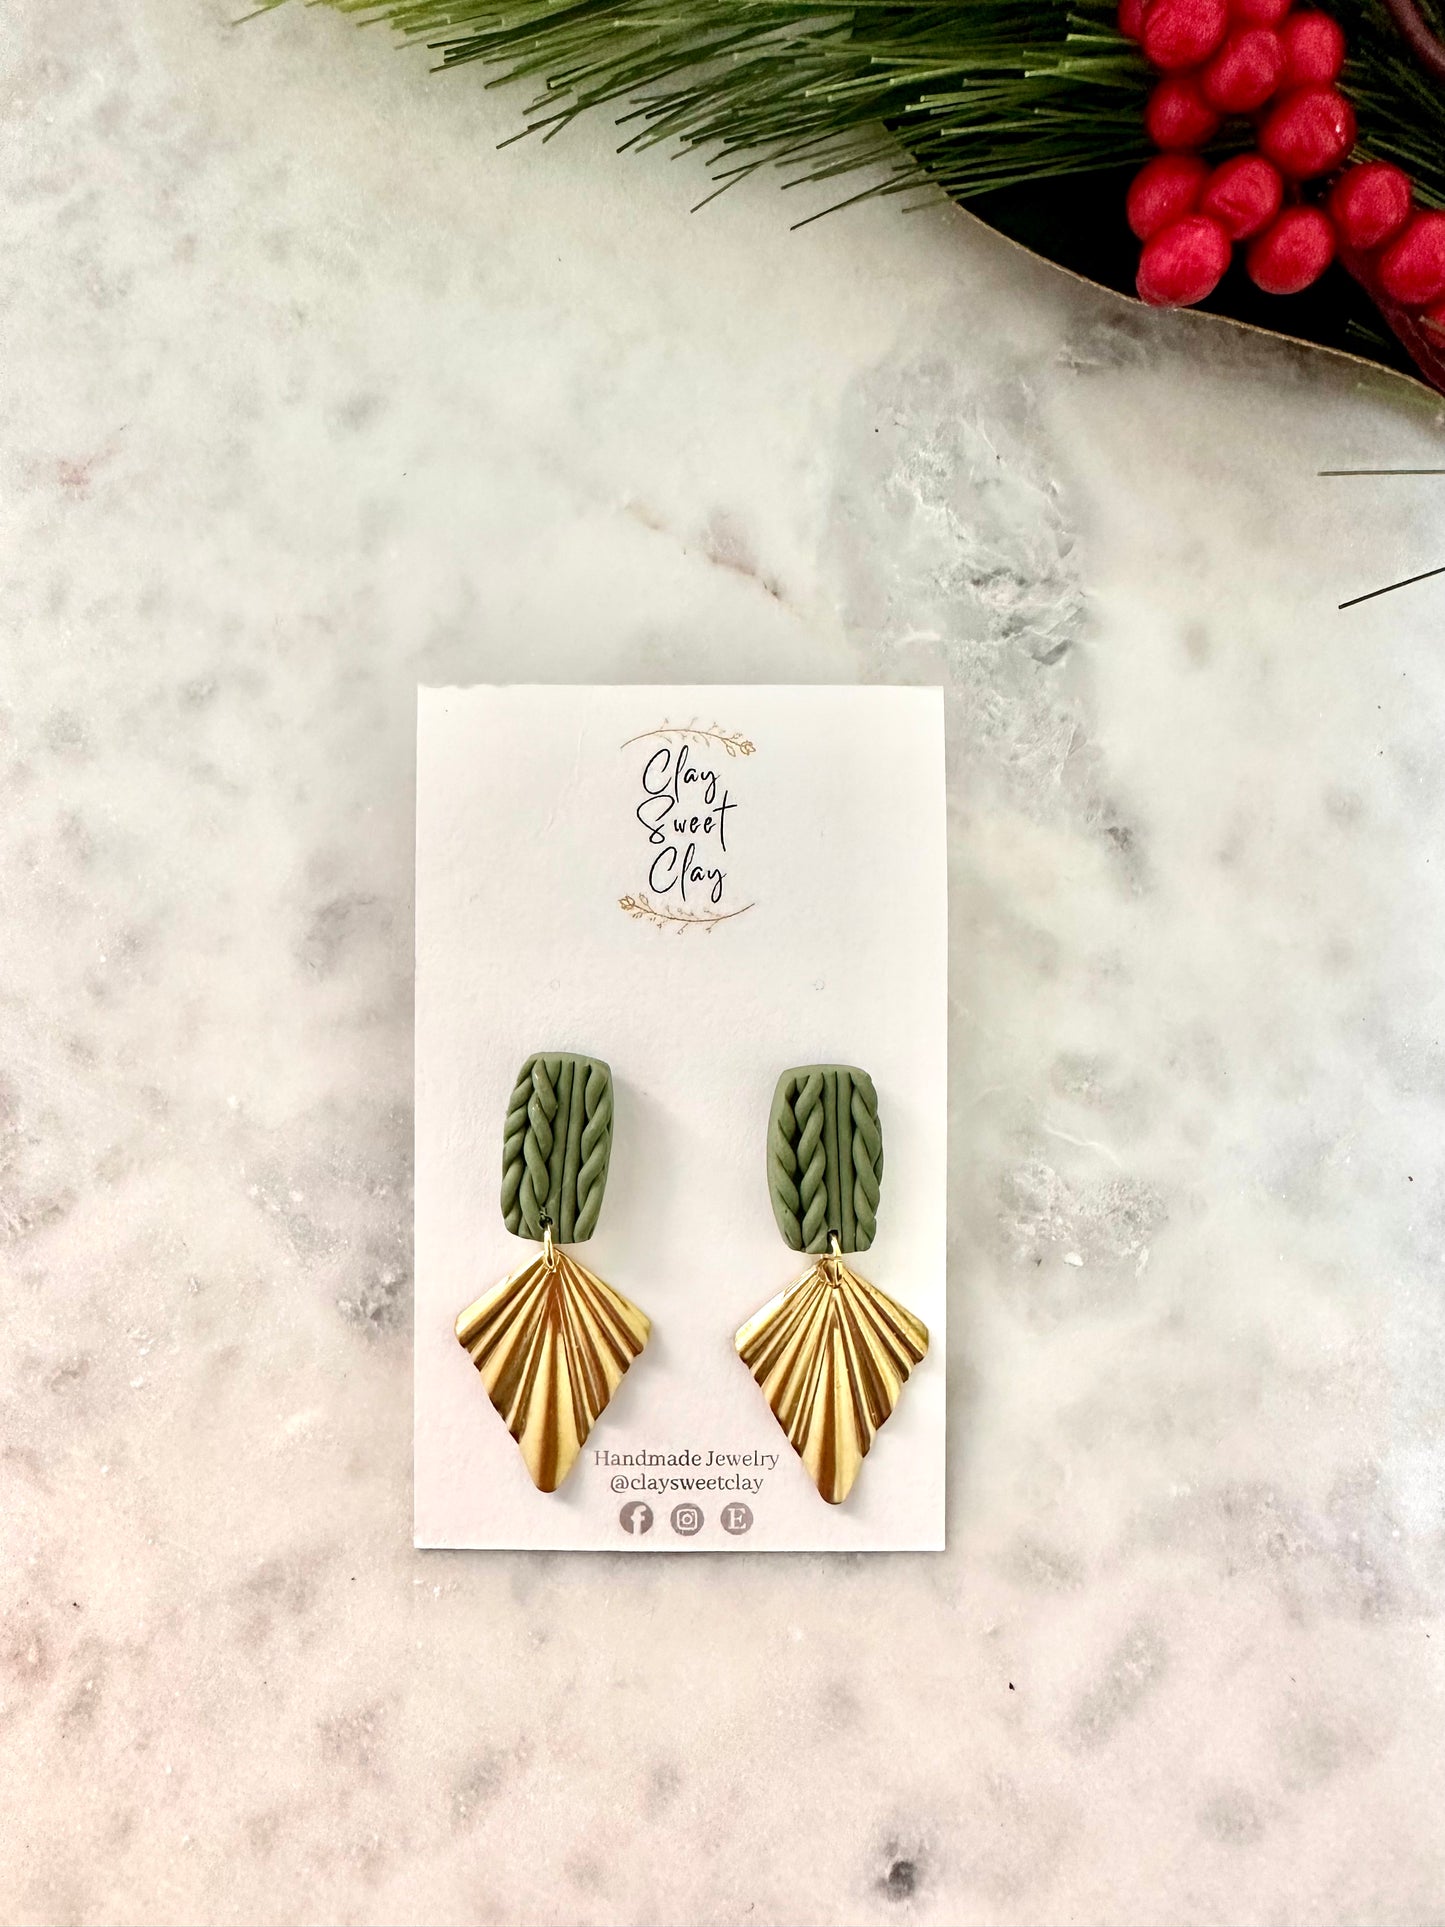 Green Knitted Sweater Earrings & Gold Charm